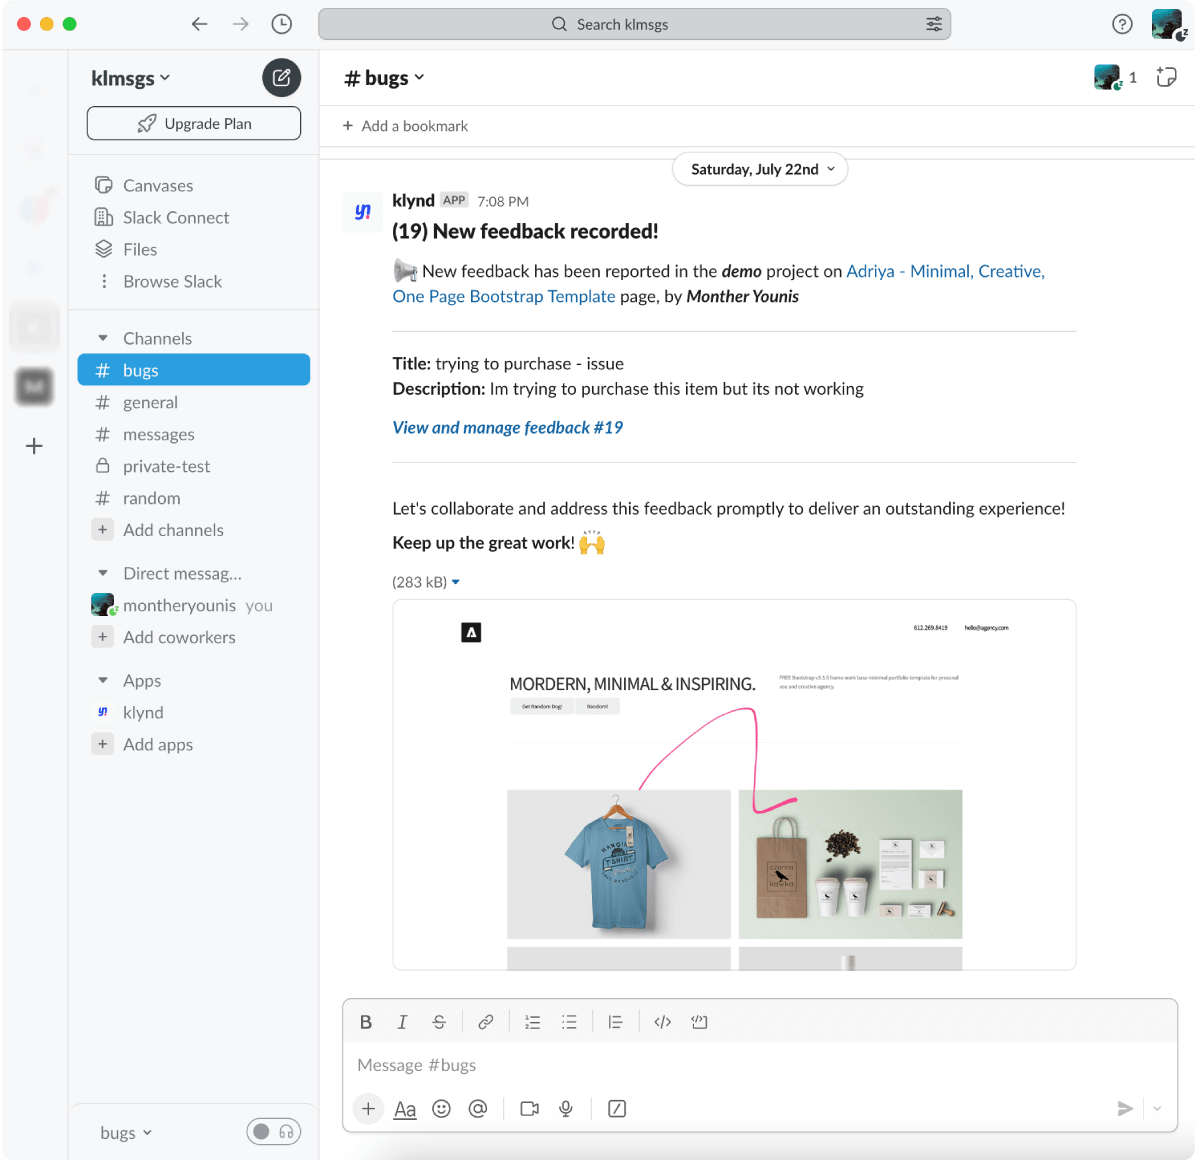 Customer feedback by klynd on Slack channel with an annotated screenshot and video link with more feedback details